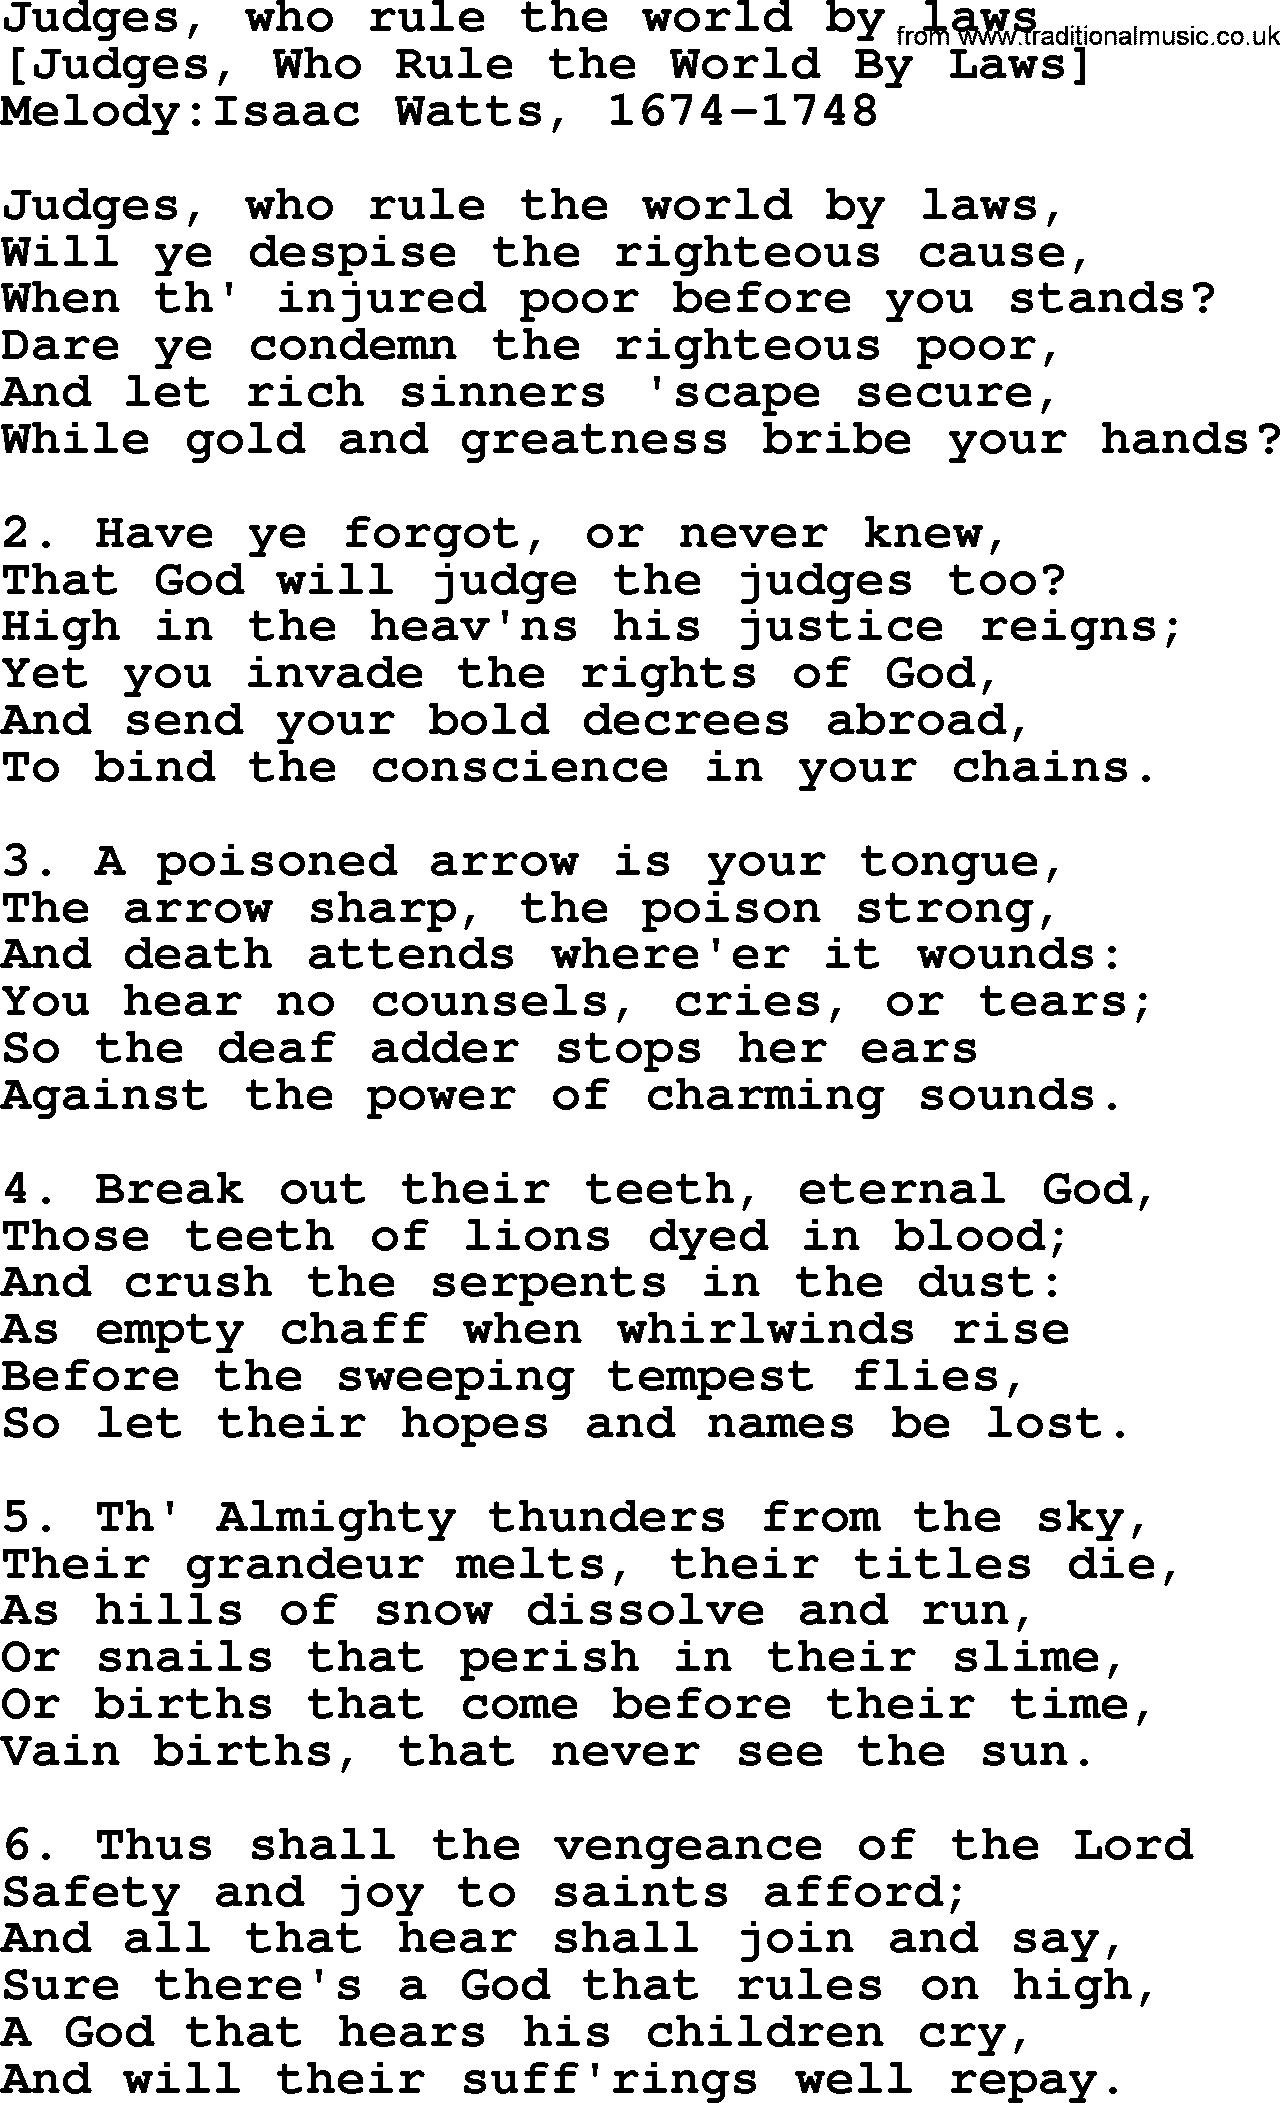 Old English Song: Judges, Who Rule The World By Laws lyrics